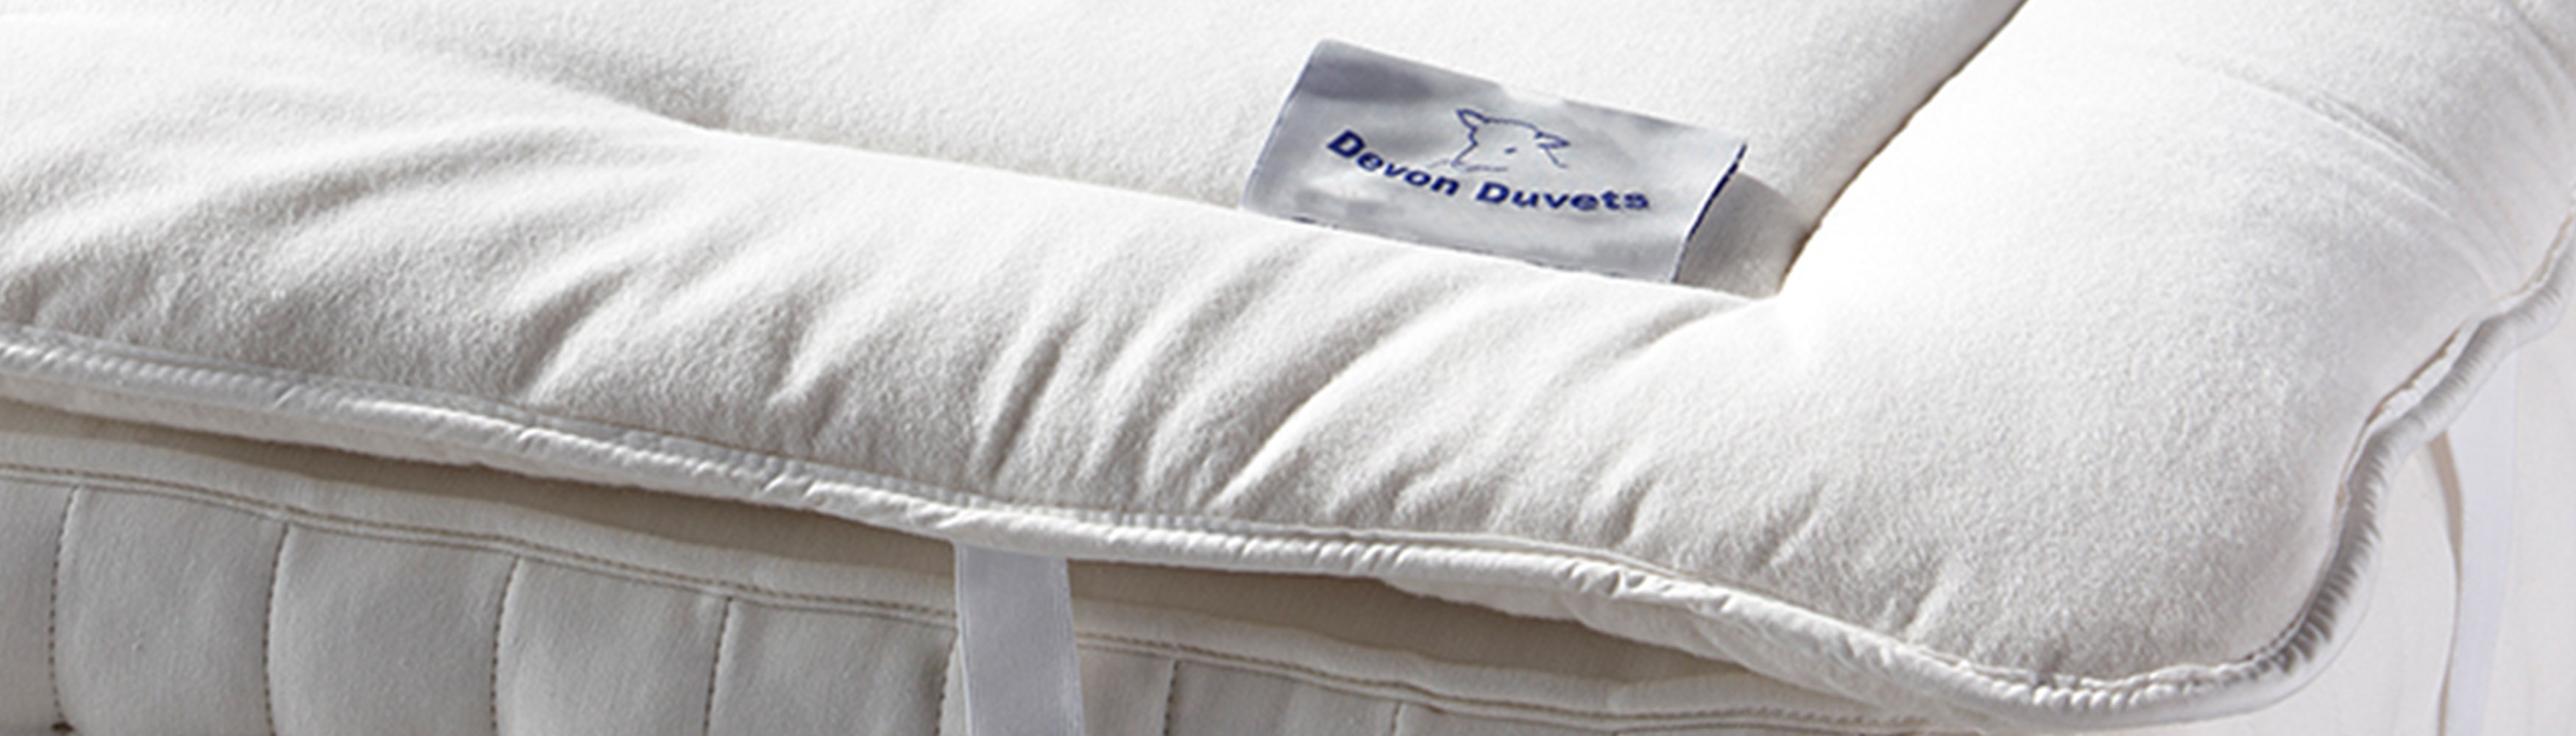 Refresh your mattress topper and duvet to rid stains